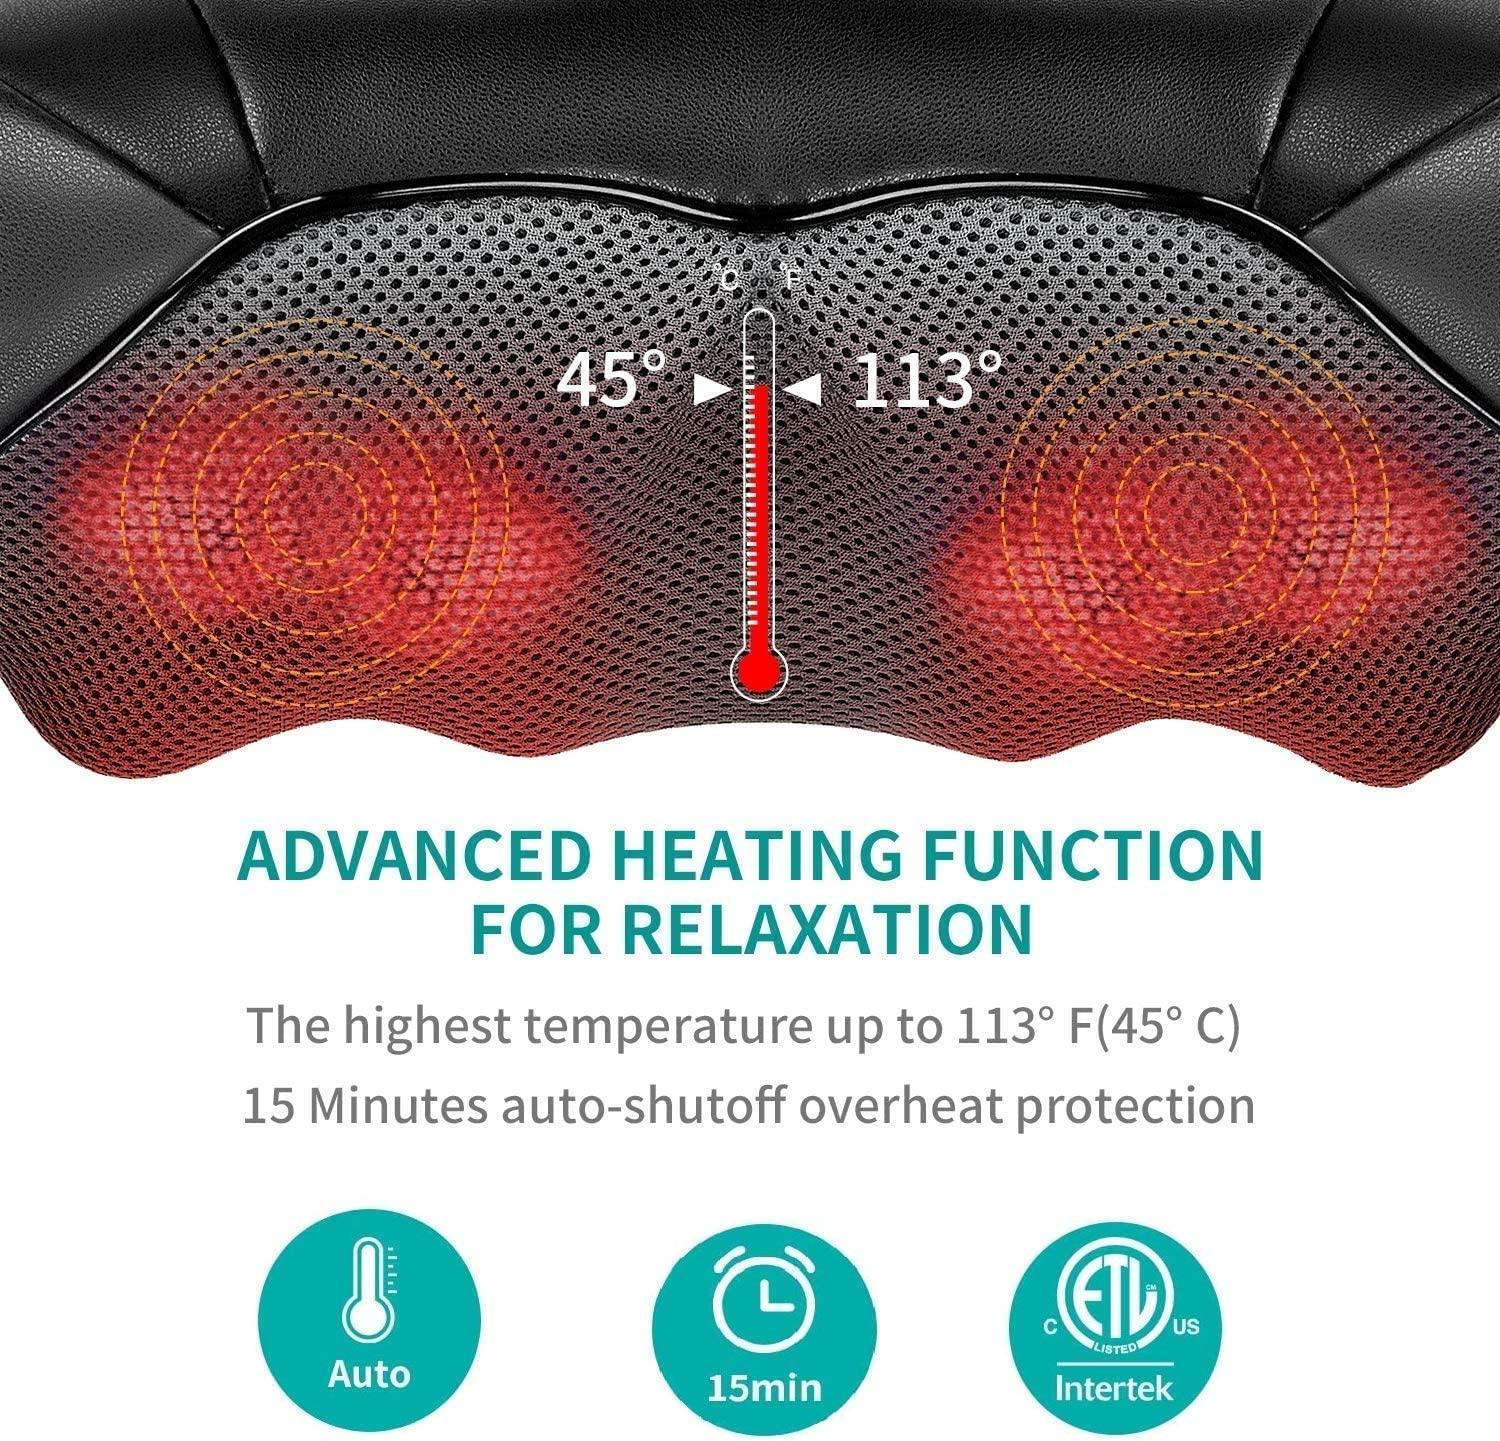 Back Massager with Heat, Shiatsu Back and Neck Massager with 3D Deep Tissue  Kneading for Back Shoulder Legs Foot Body Pain Relief, at Home Office Car  Use 